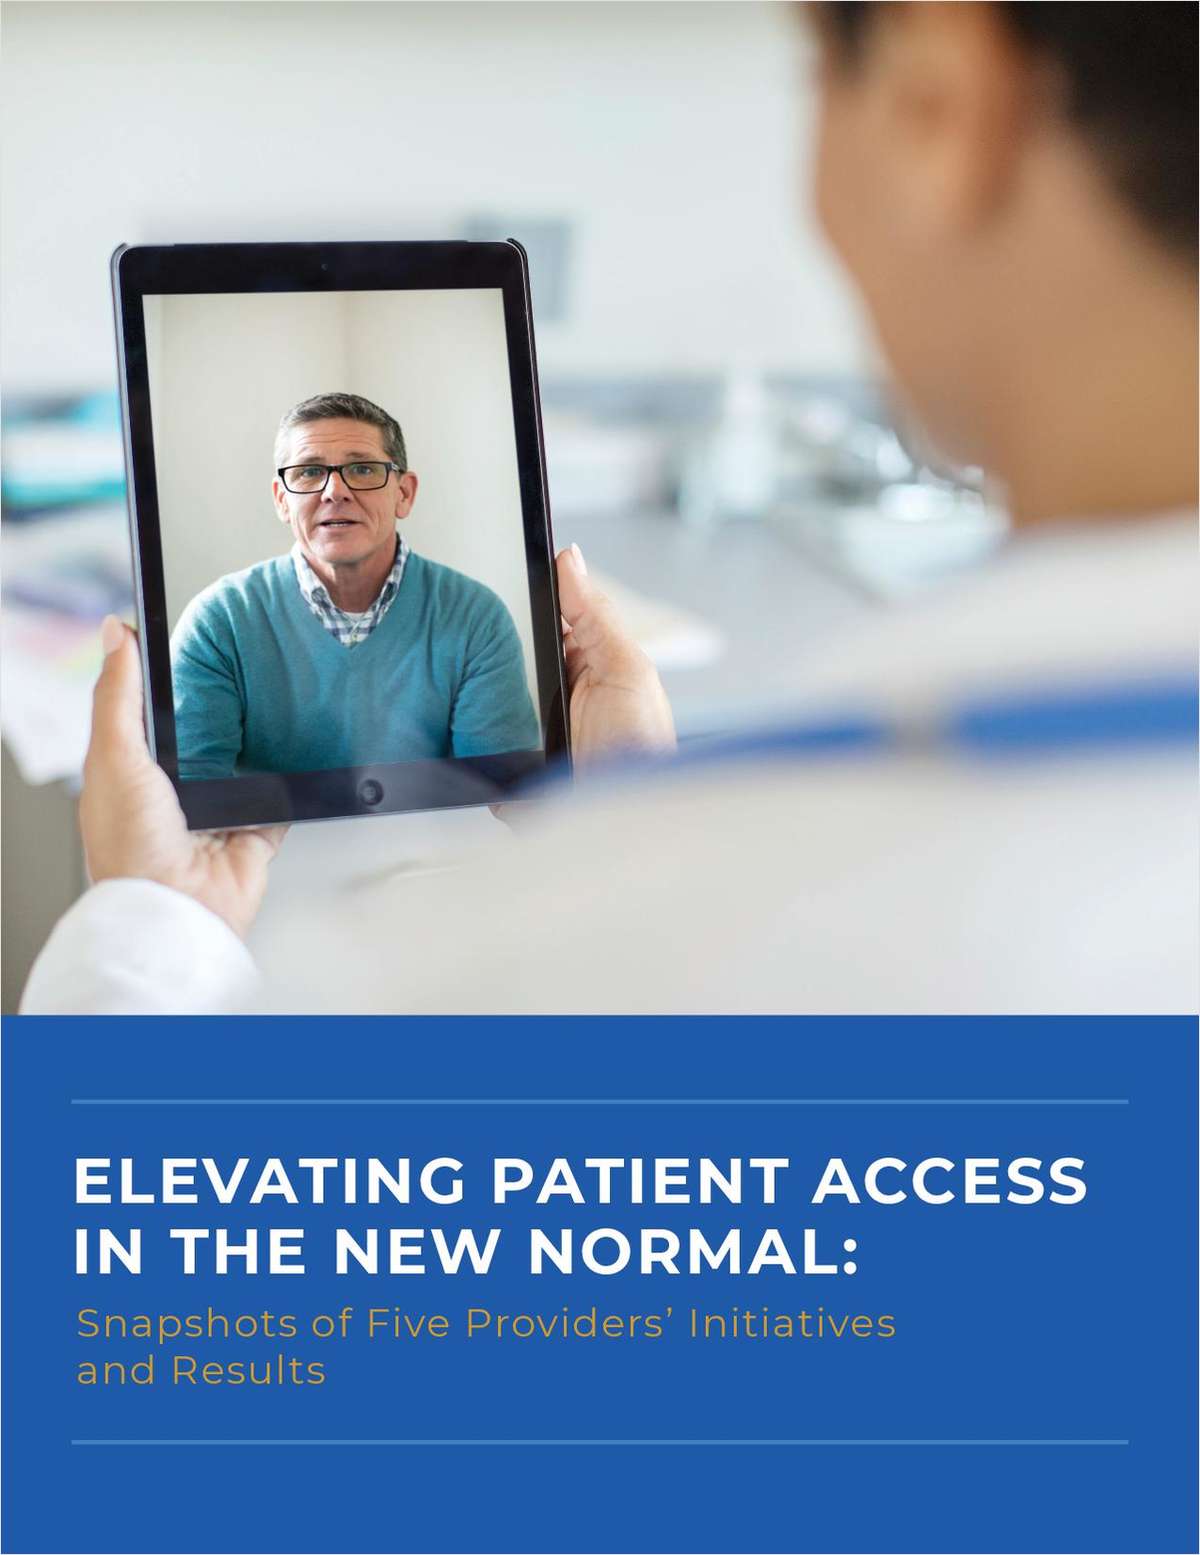 Snapshots of Five Provider Initiatives and Results | Elevating Patient Access